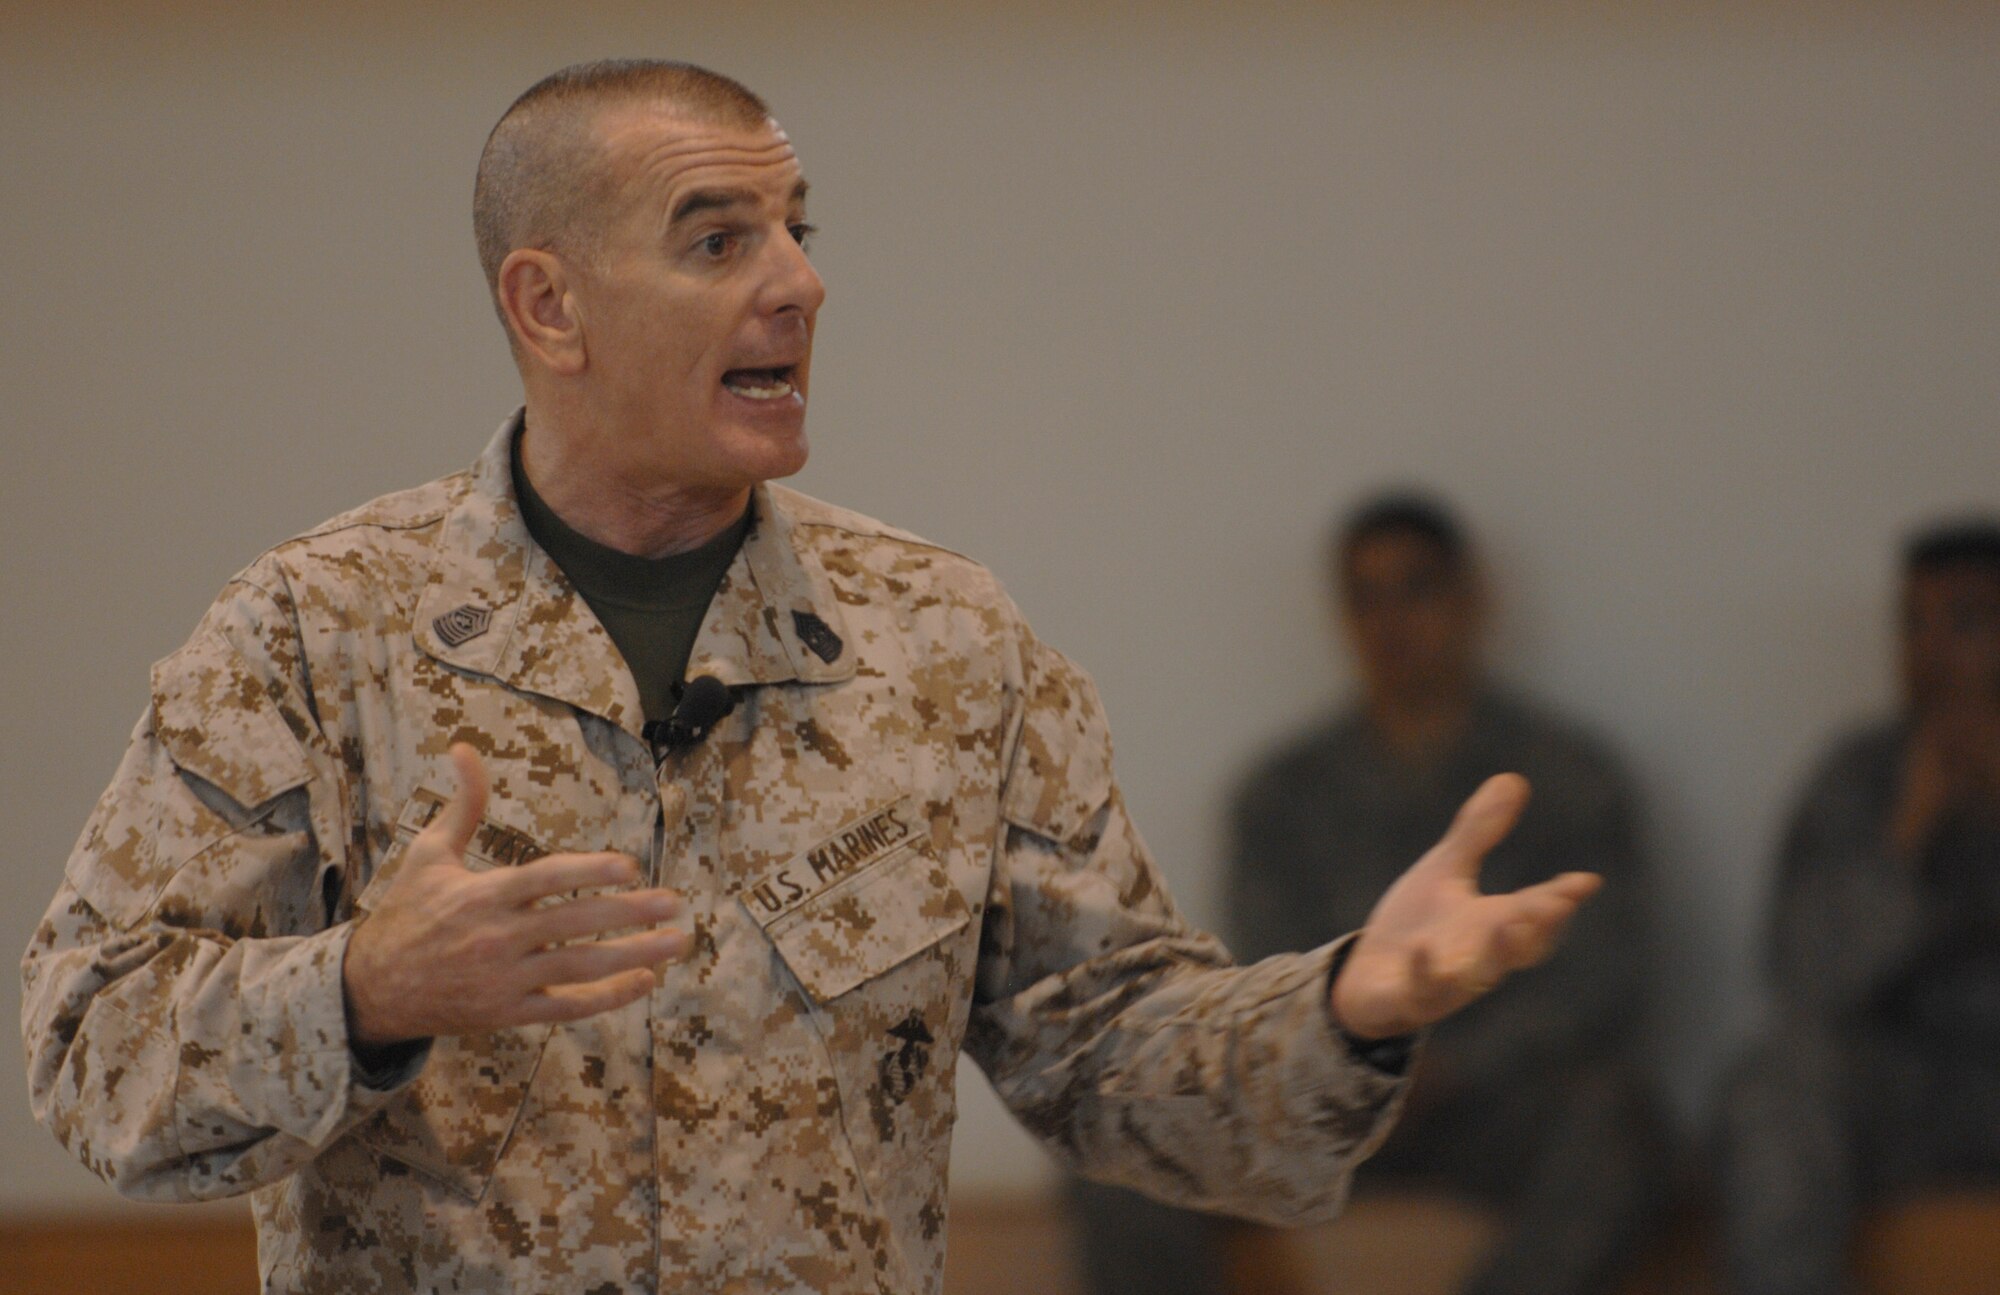 U.S. Marine Corps Sgt. Maj. Bryan Battaglia, senior enlisted advisor to the Chairman of the Joint Chiefs of Staff, speaks to Airmen June 20, 2013, during a base town hall meeting at the Hardstand Fitness Center on RAF Mildenhall, England. Battaglia spoke about military service, fitness and the priorities of the Chairman of the JCS.  (U.S. Air Force photo by Airman 1st Class Dillon Johnston/Released)